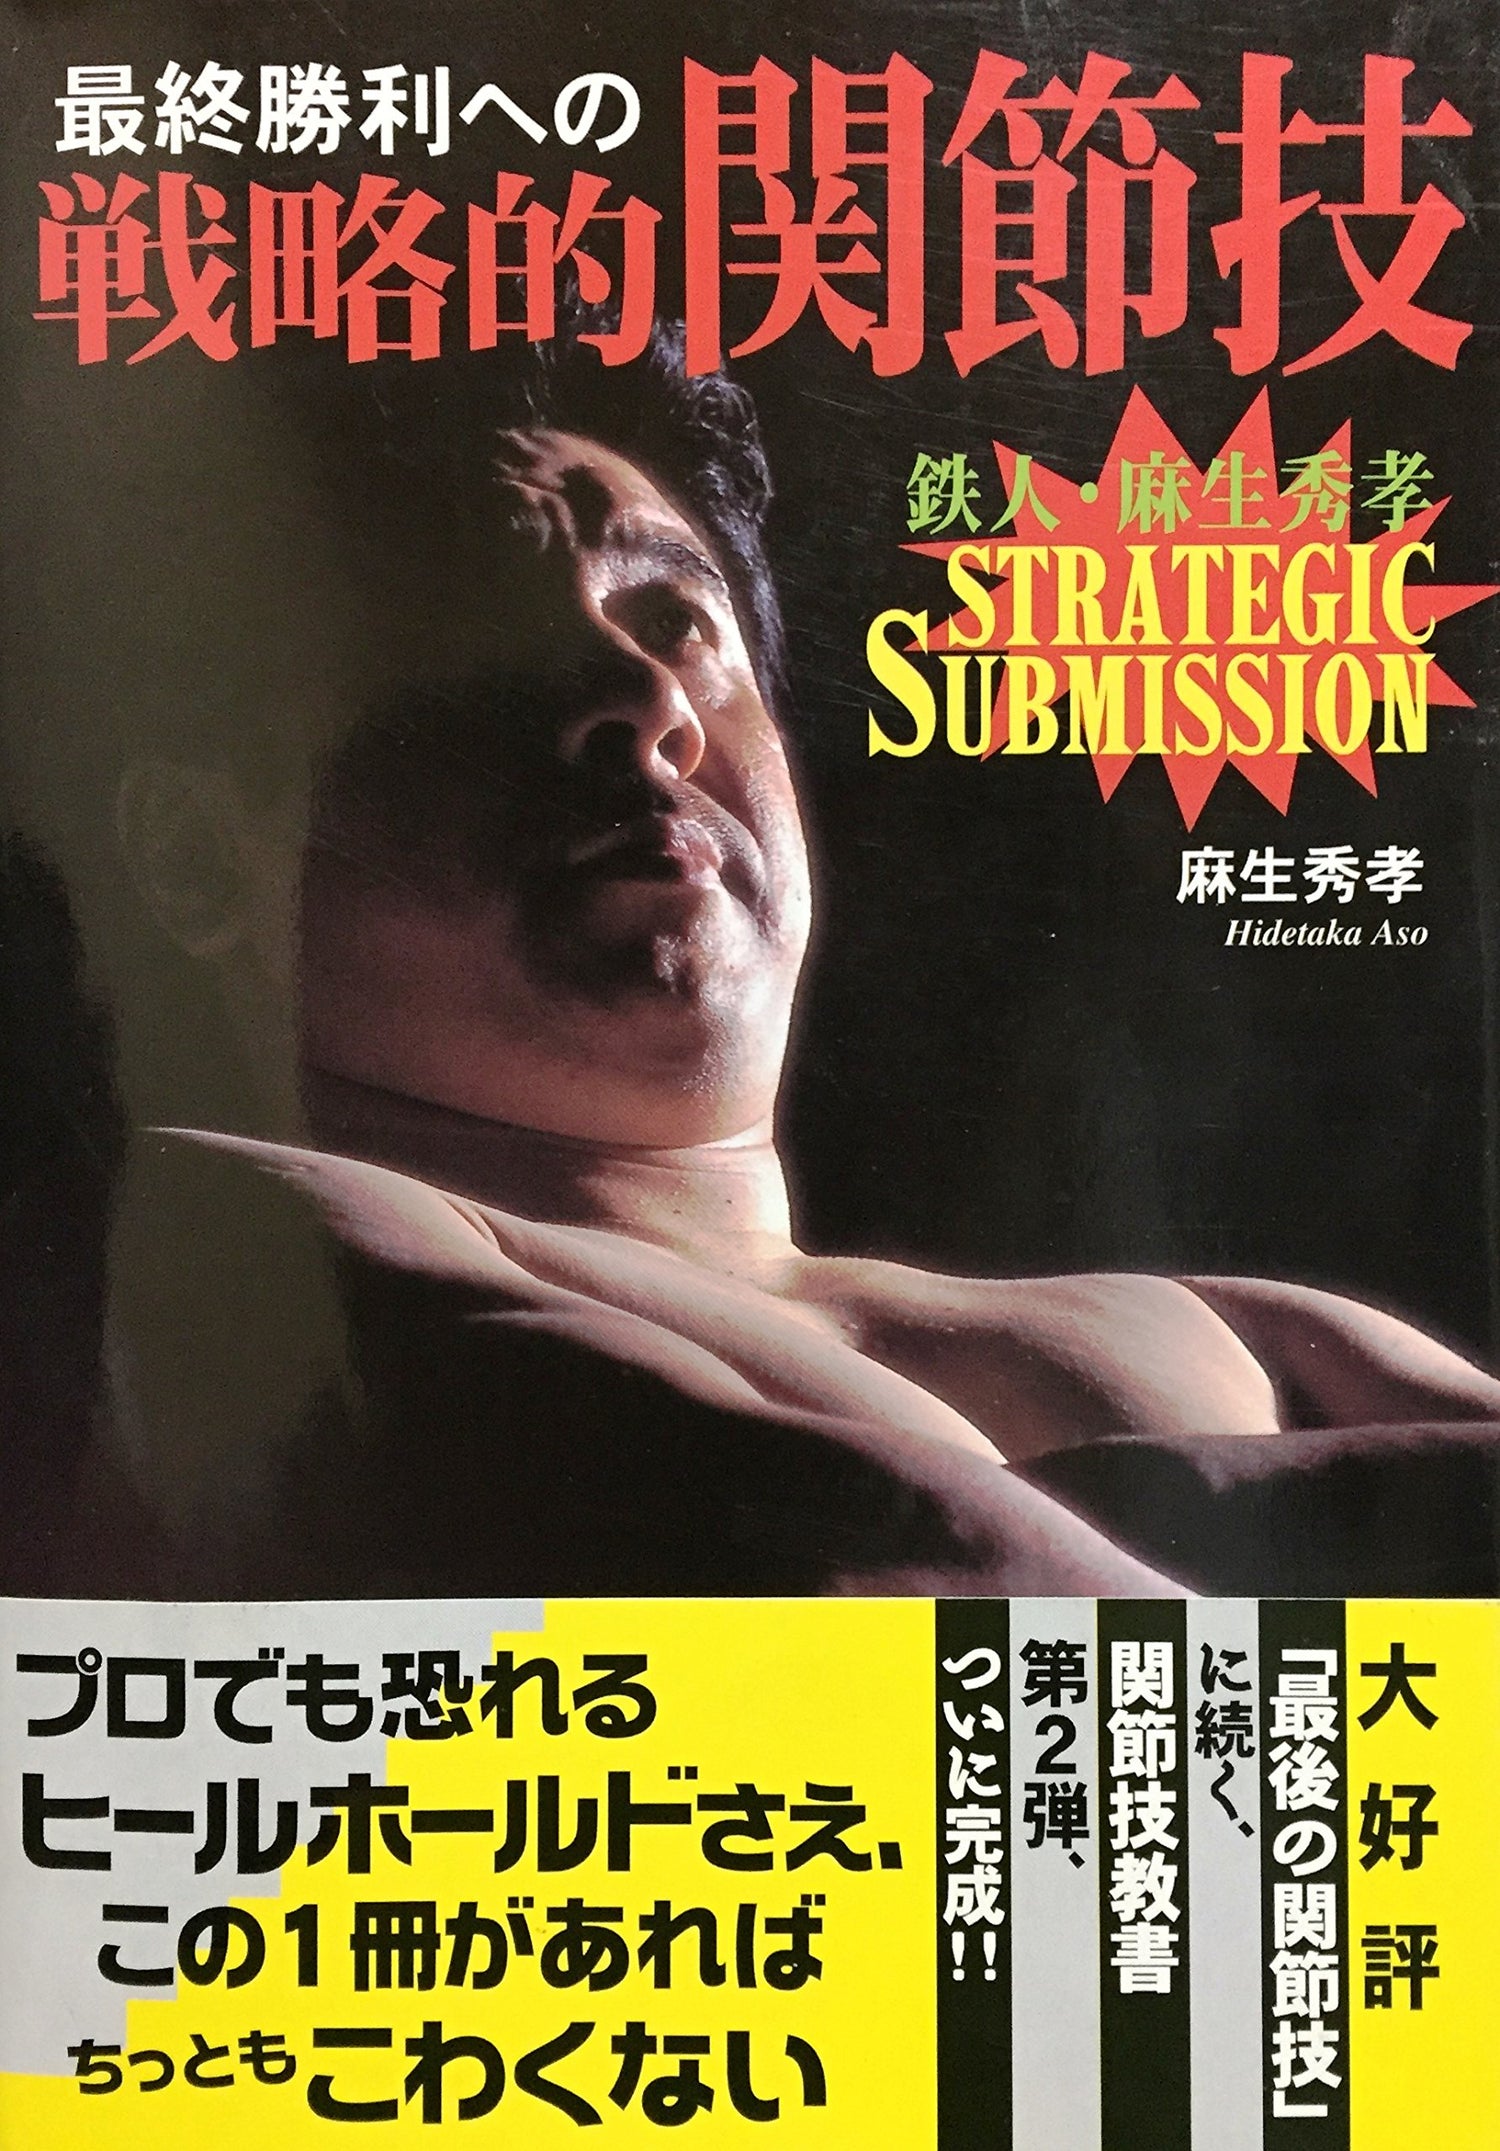 Strategic Submission Catch Wrestling Book by Hidetaka Aso (Preowned) - Budovideos Inc